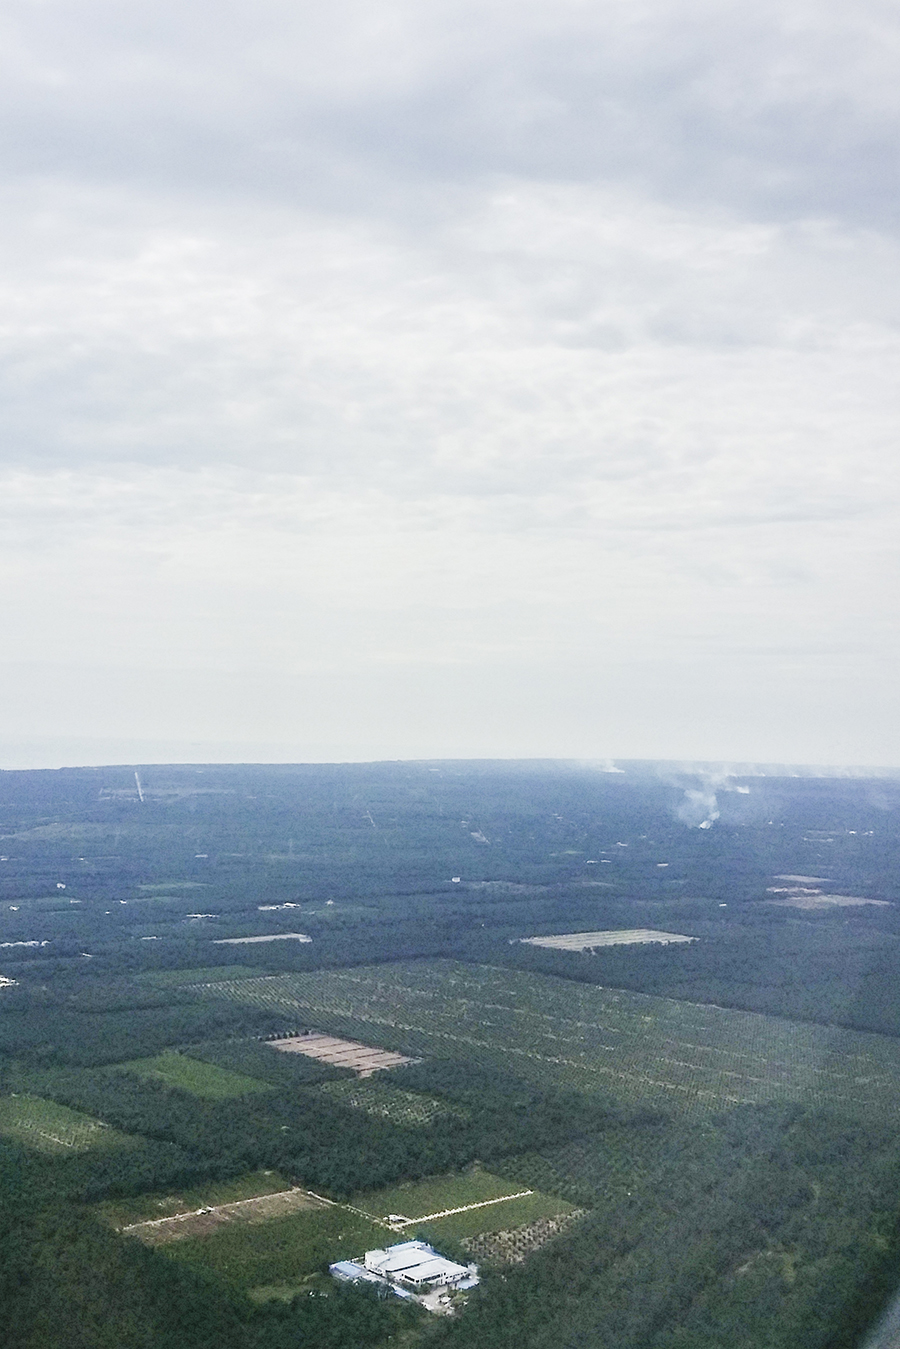 Smoky spot among greens from the plane.